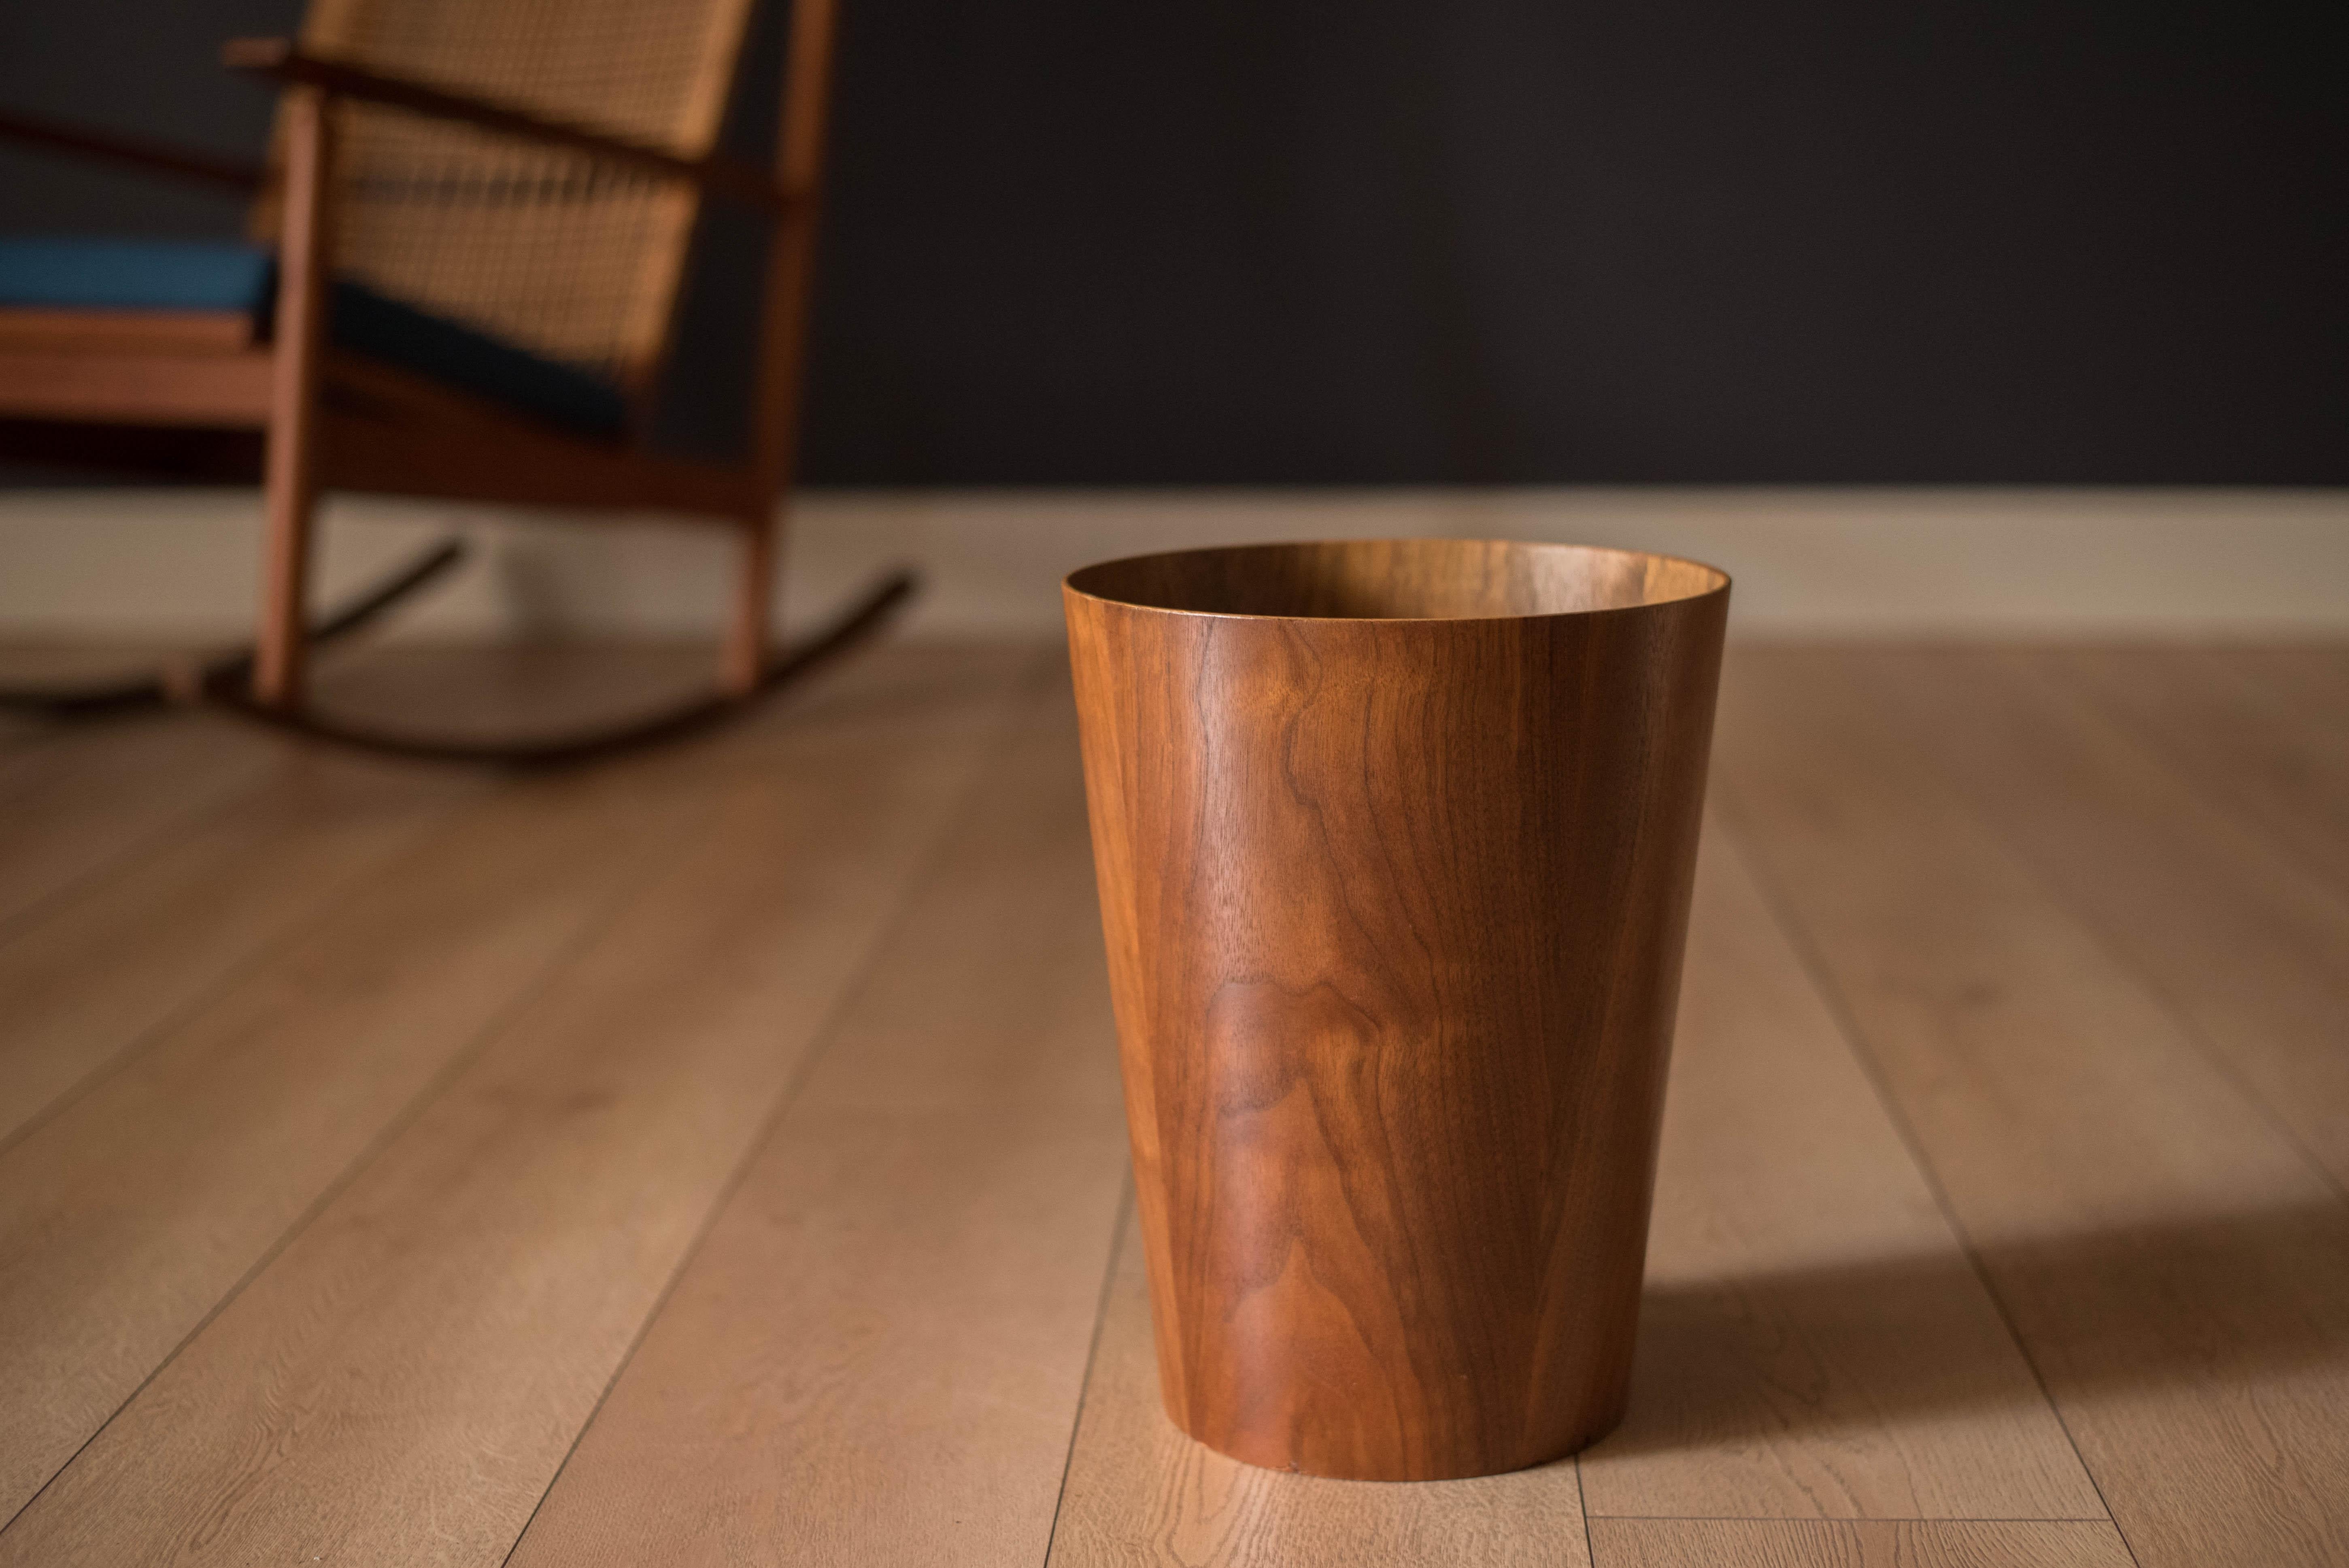 Mid-Century Modern waste basket in walnut designed by Martin Åberg for Servex, Sweden circa 1960s. A great accessory for the home or office. Interior bin is also lined in walnut.




Offered by Mid Century Maddist